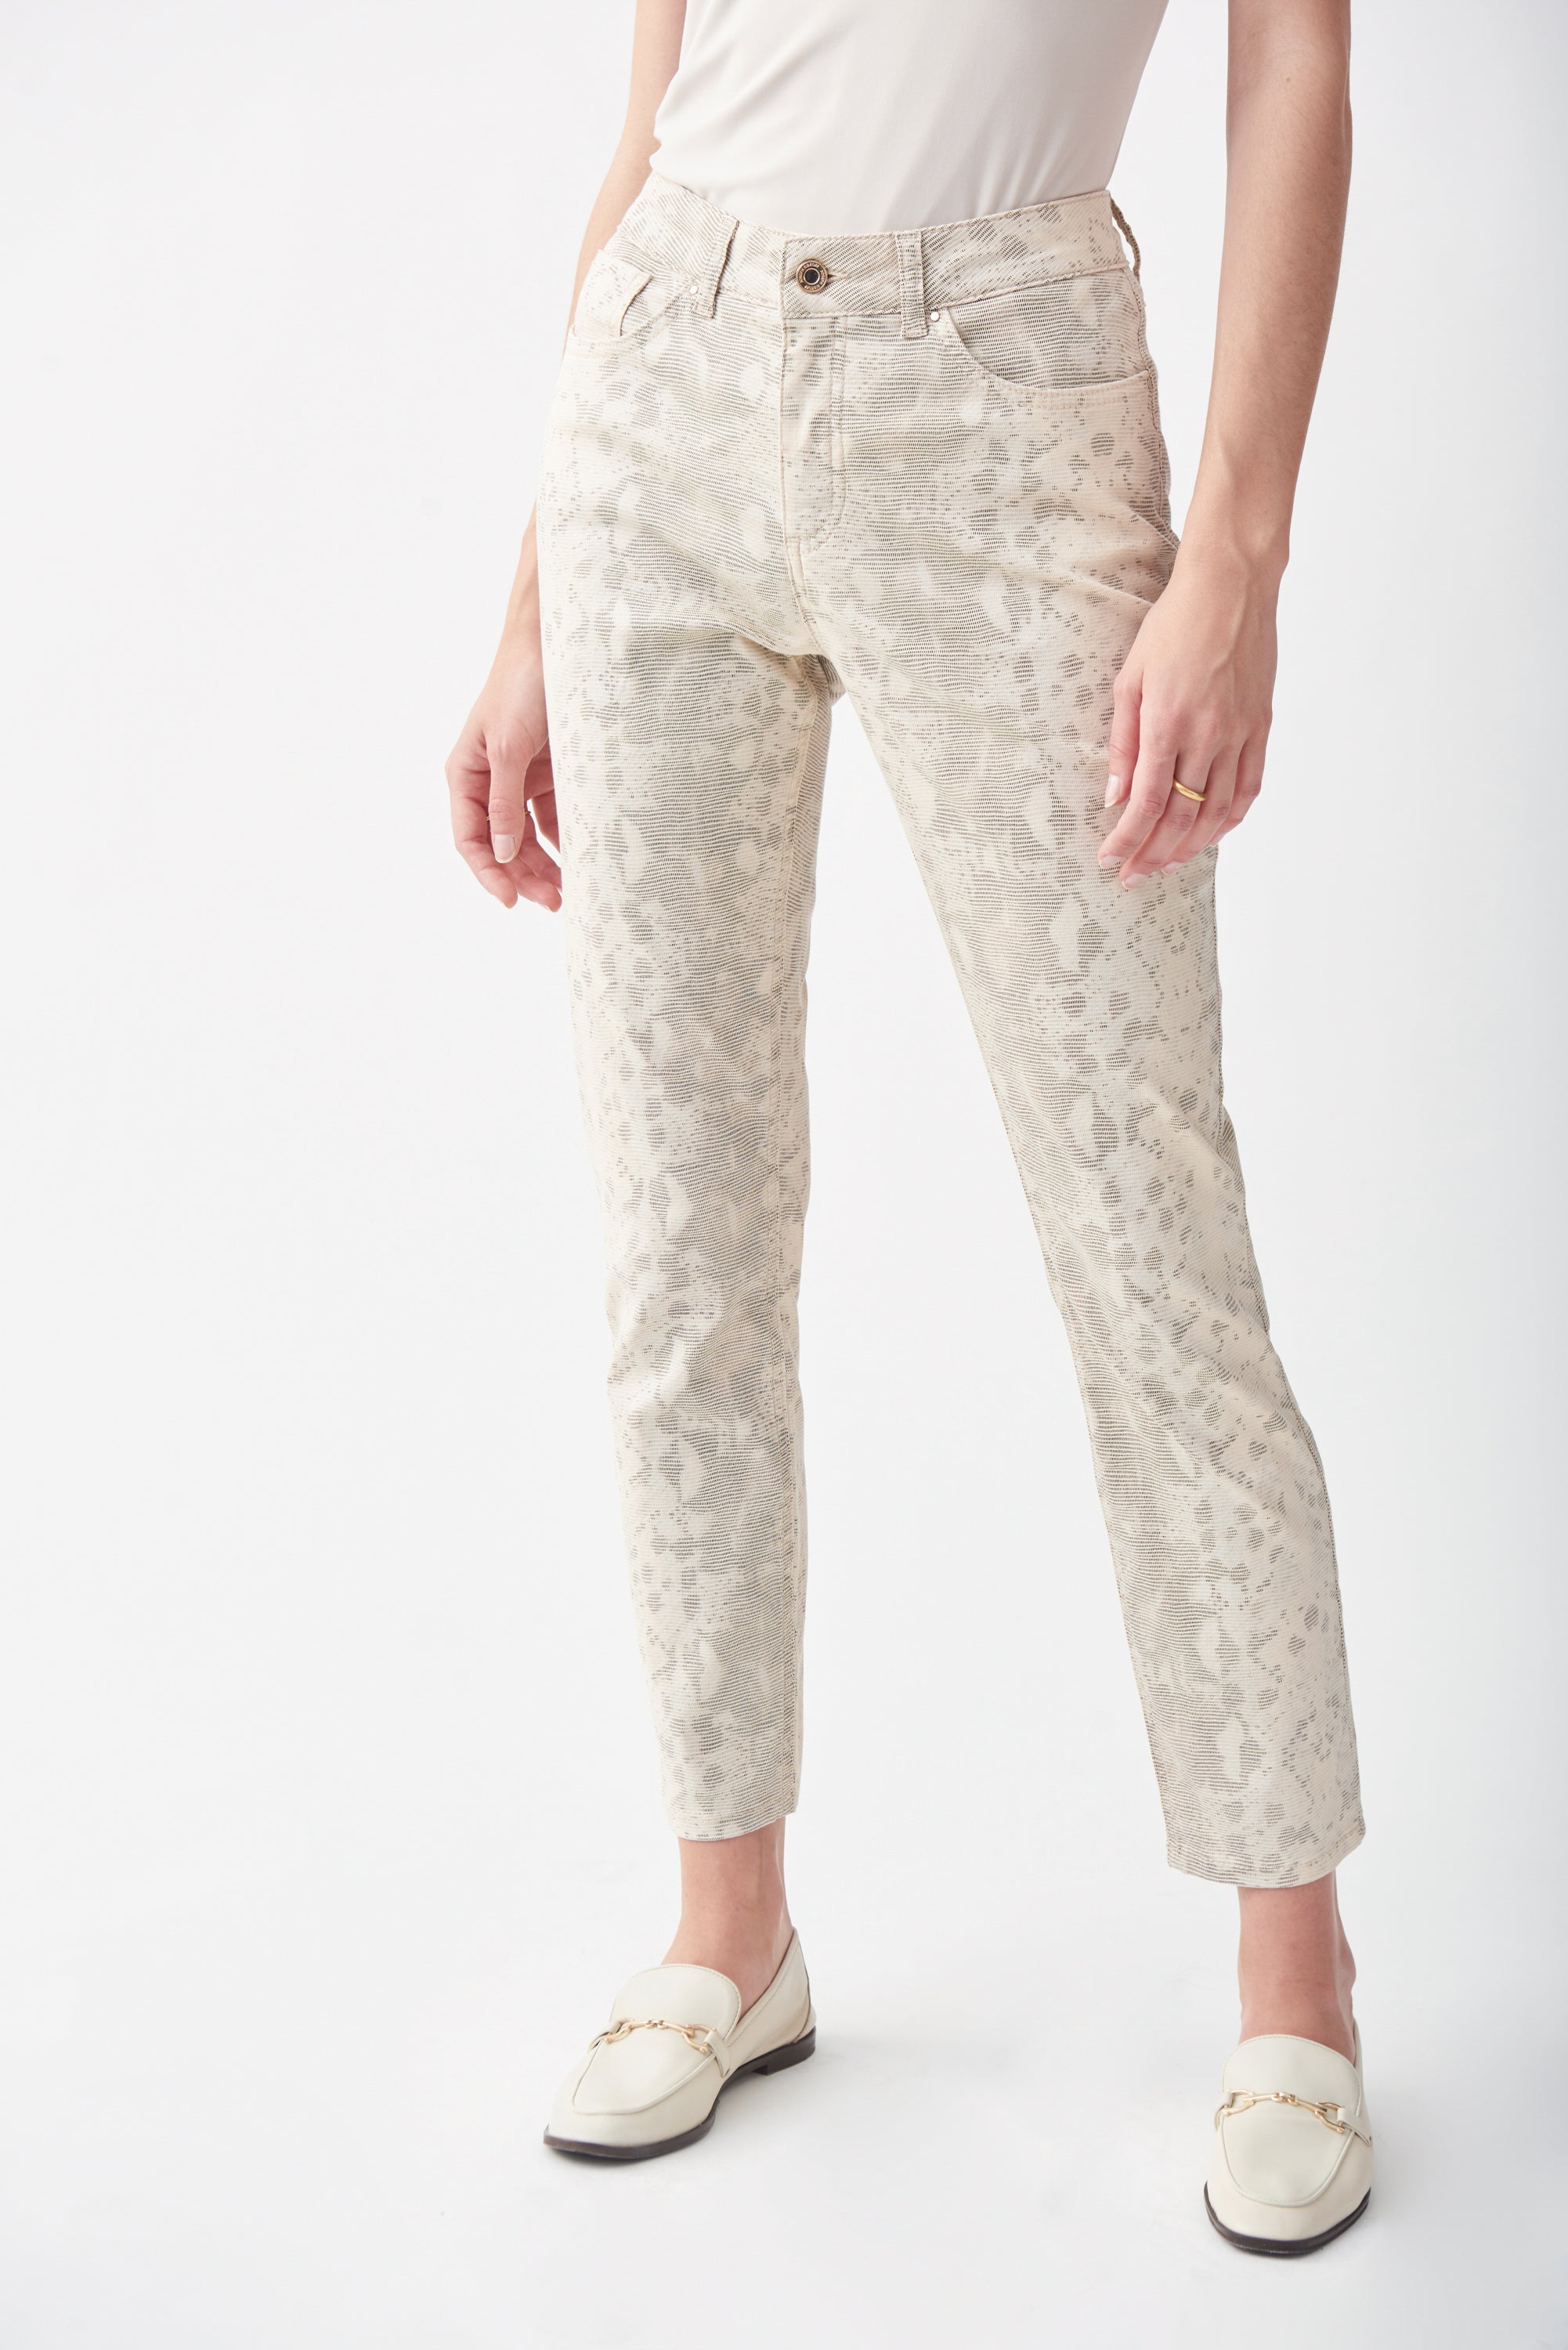 Embrace your wild side with these Joseph Ribkoff Print Jeans. These are designed to resemble snakeskin and come in the classic, slim, 5-pocket, high rise cut you know and love from Ribkoff denim.